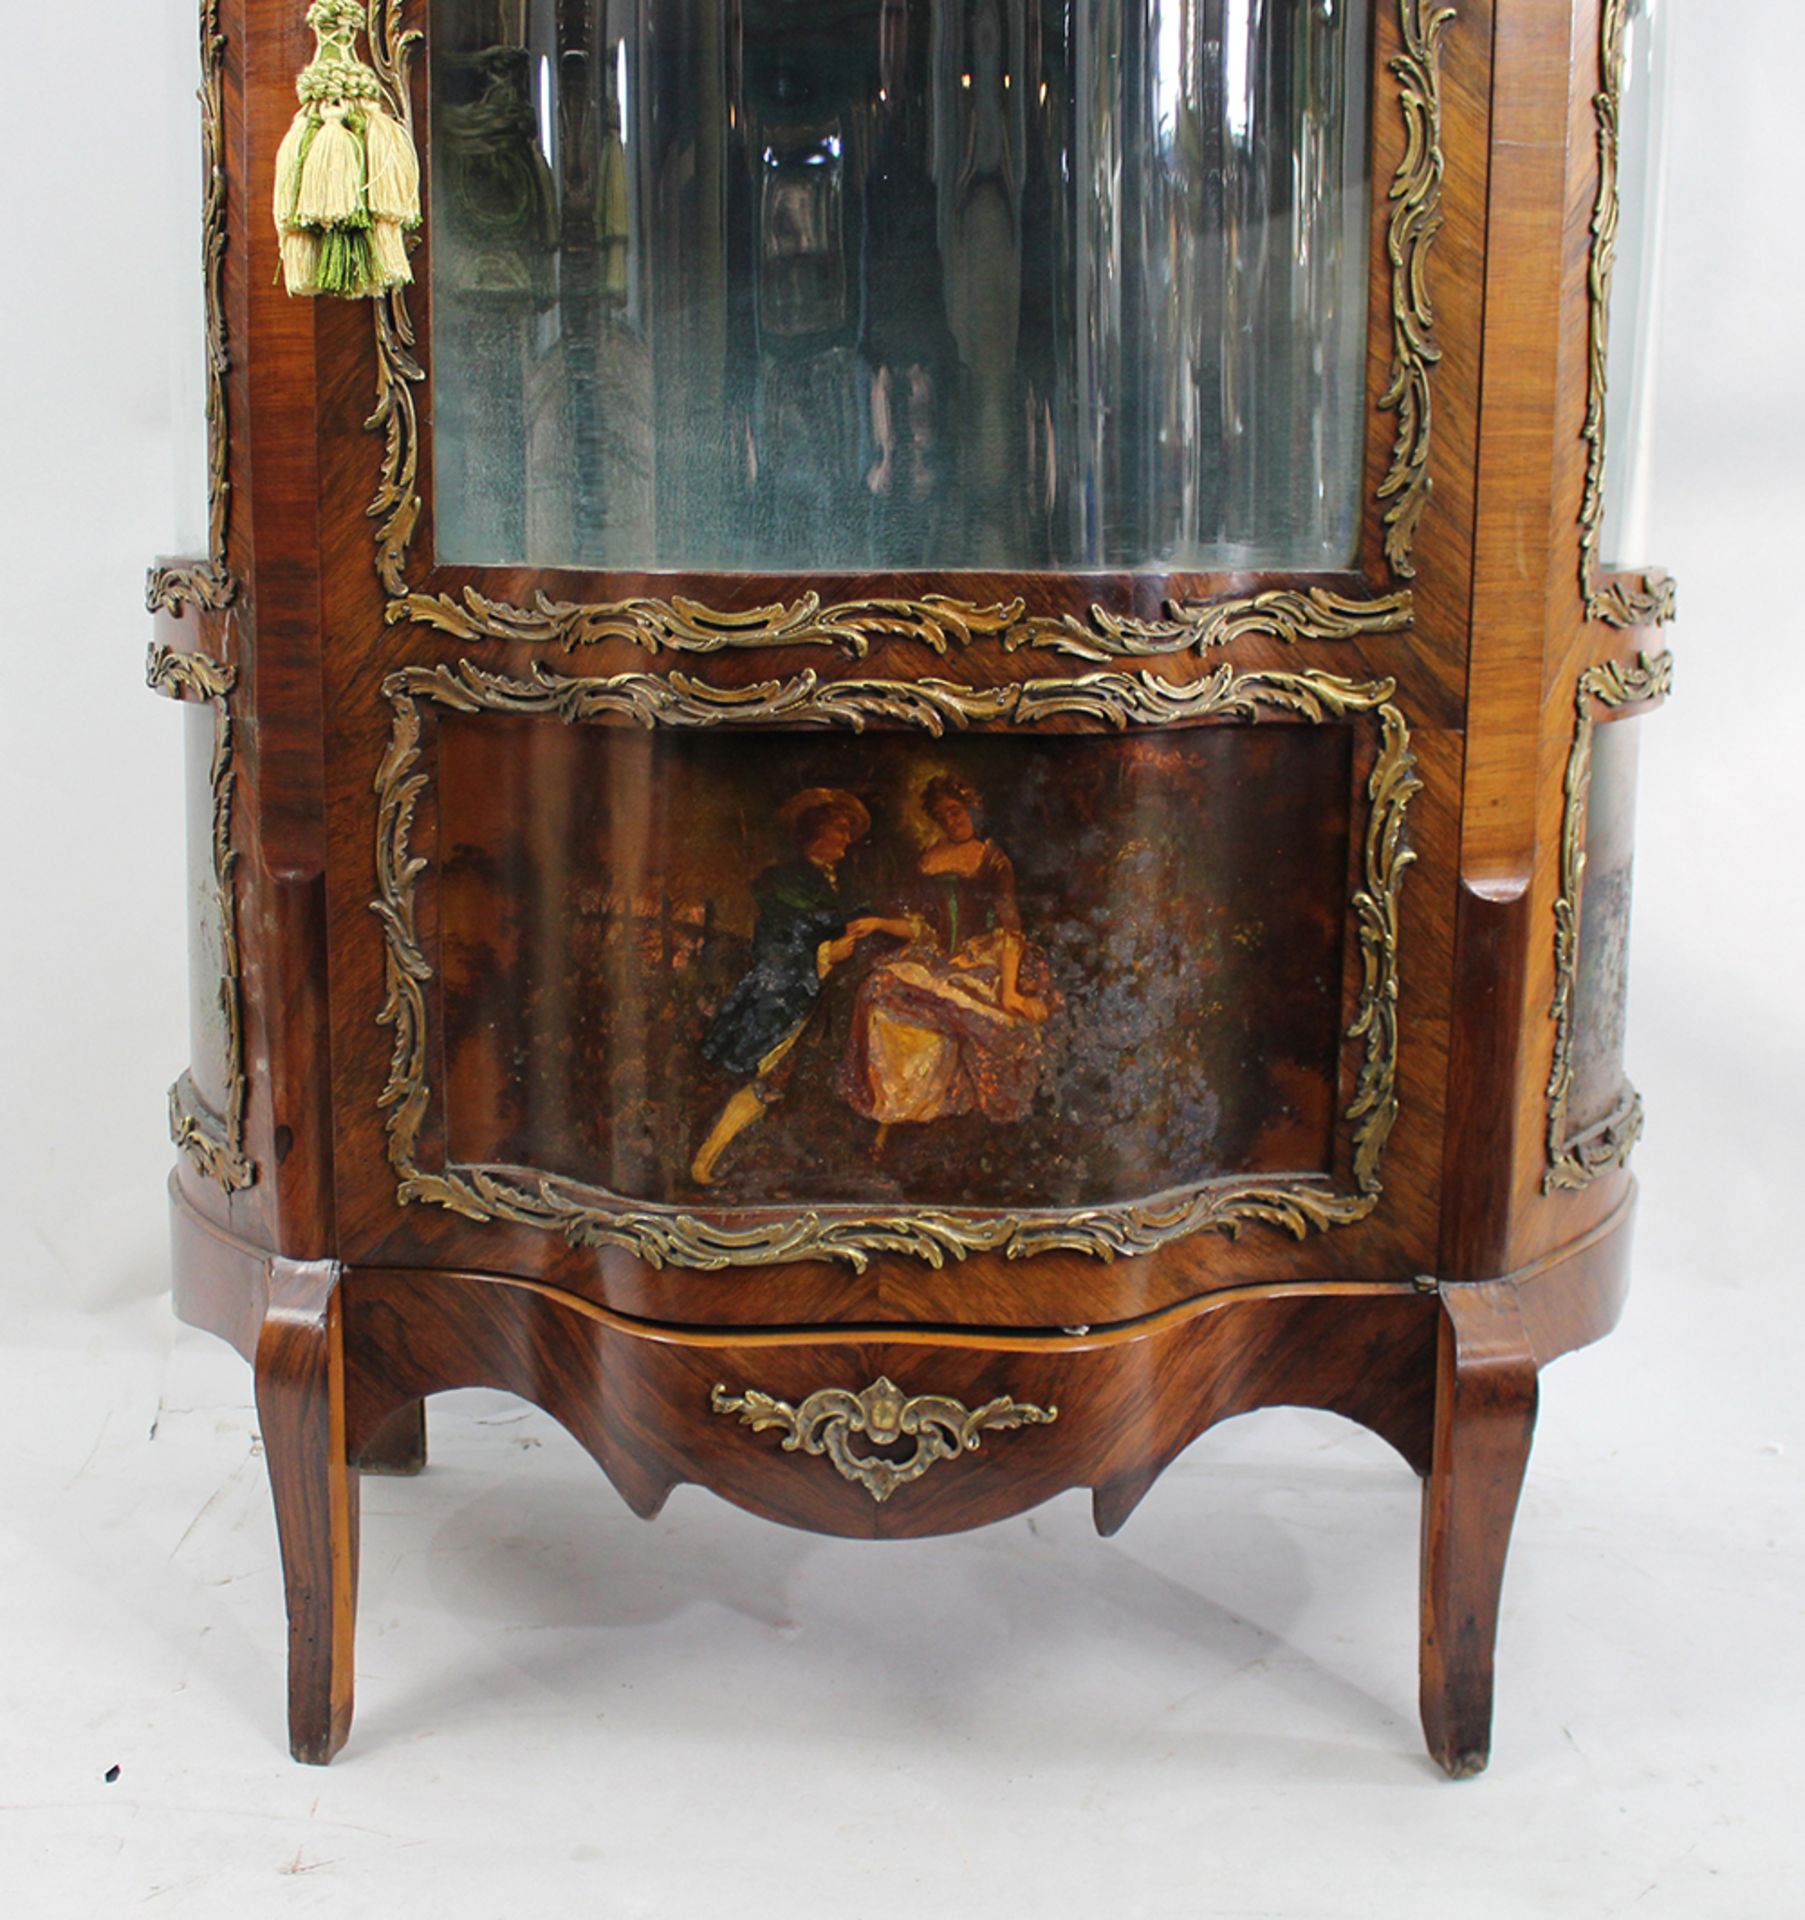 Antique French Serpentine Vernis Martin Display Cabinet - Image 12 of 12